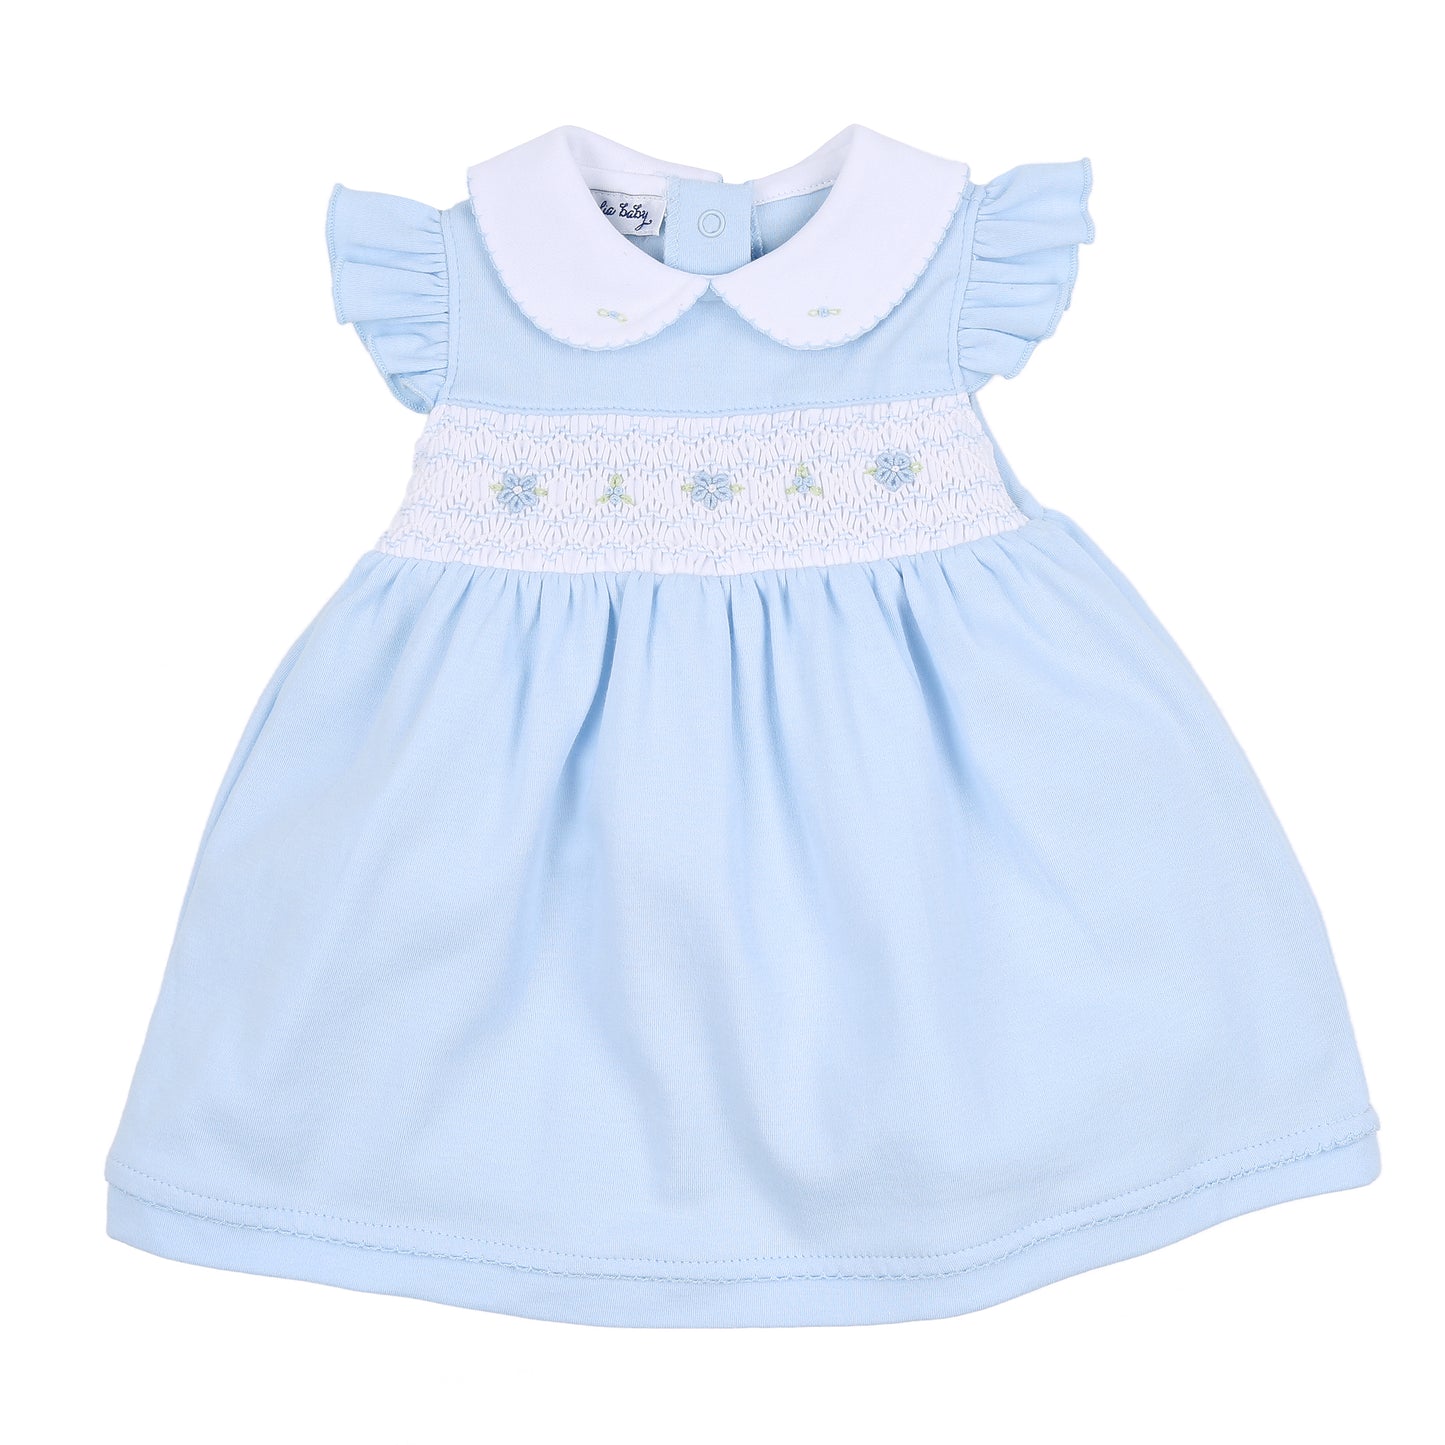 Hailey and Harry Smocked Collared Flutters Toddler Dress made by Magnolia Baby.